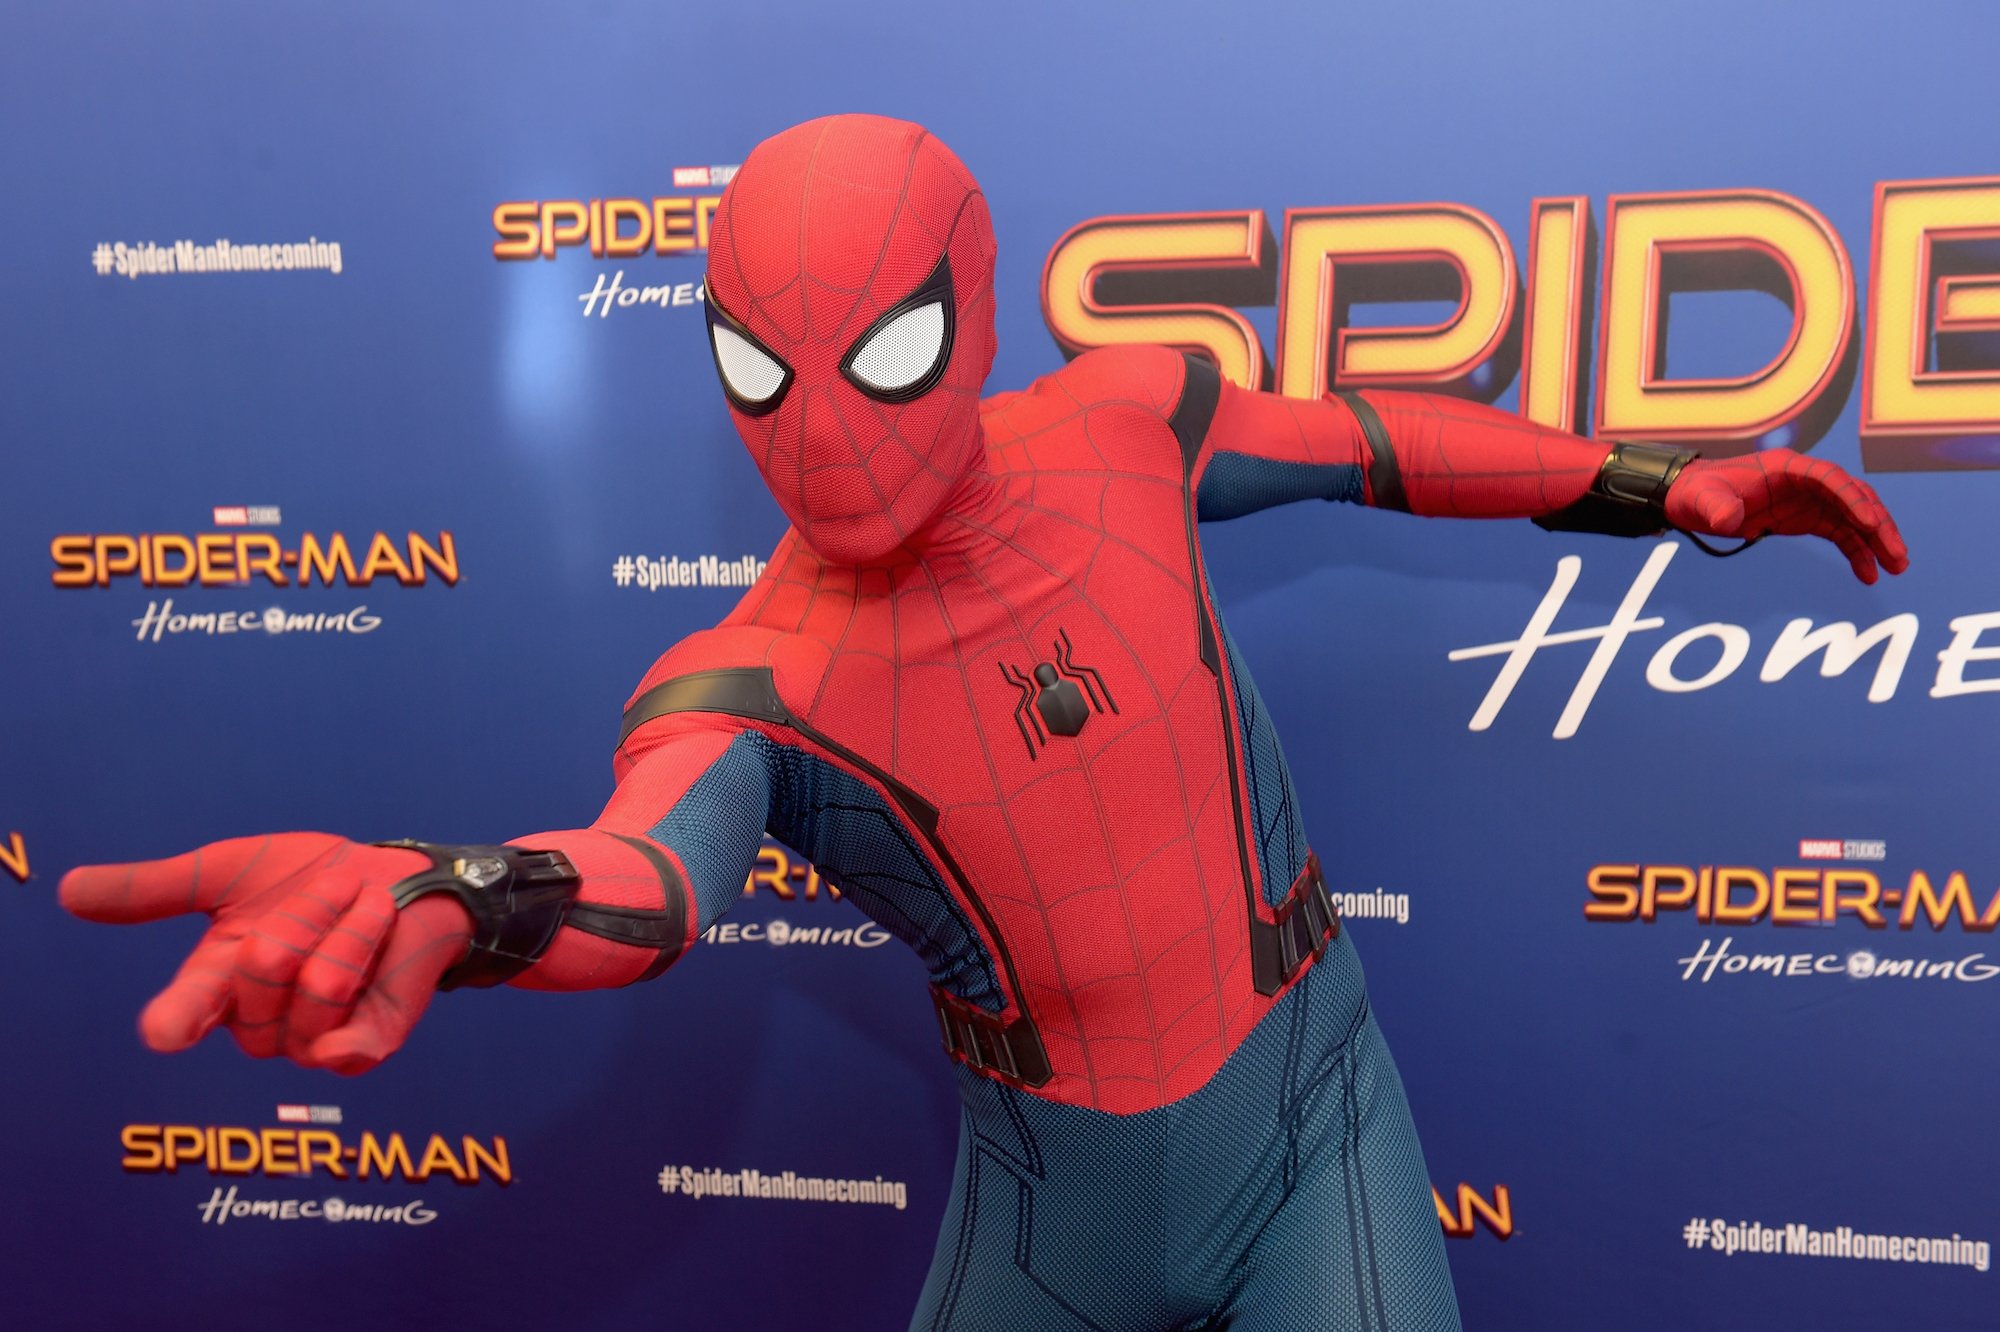 Spiderman at the 'Spiderman: Homecoming' New York First Responders' Screening on June 26, 2017